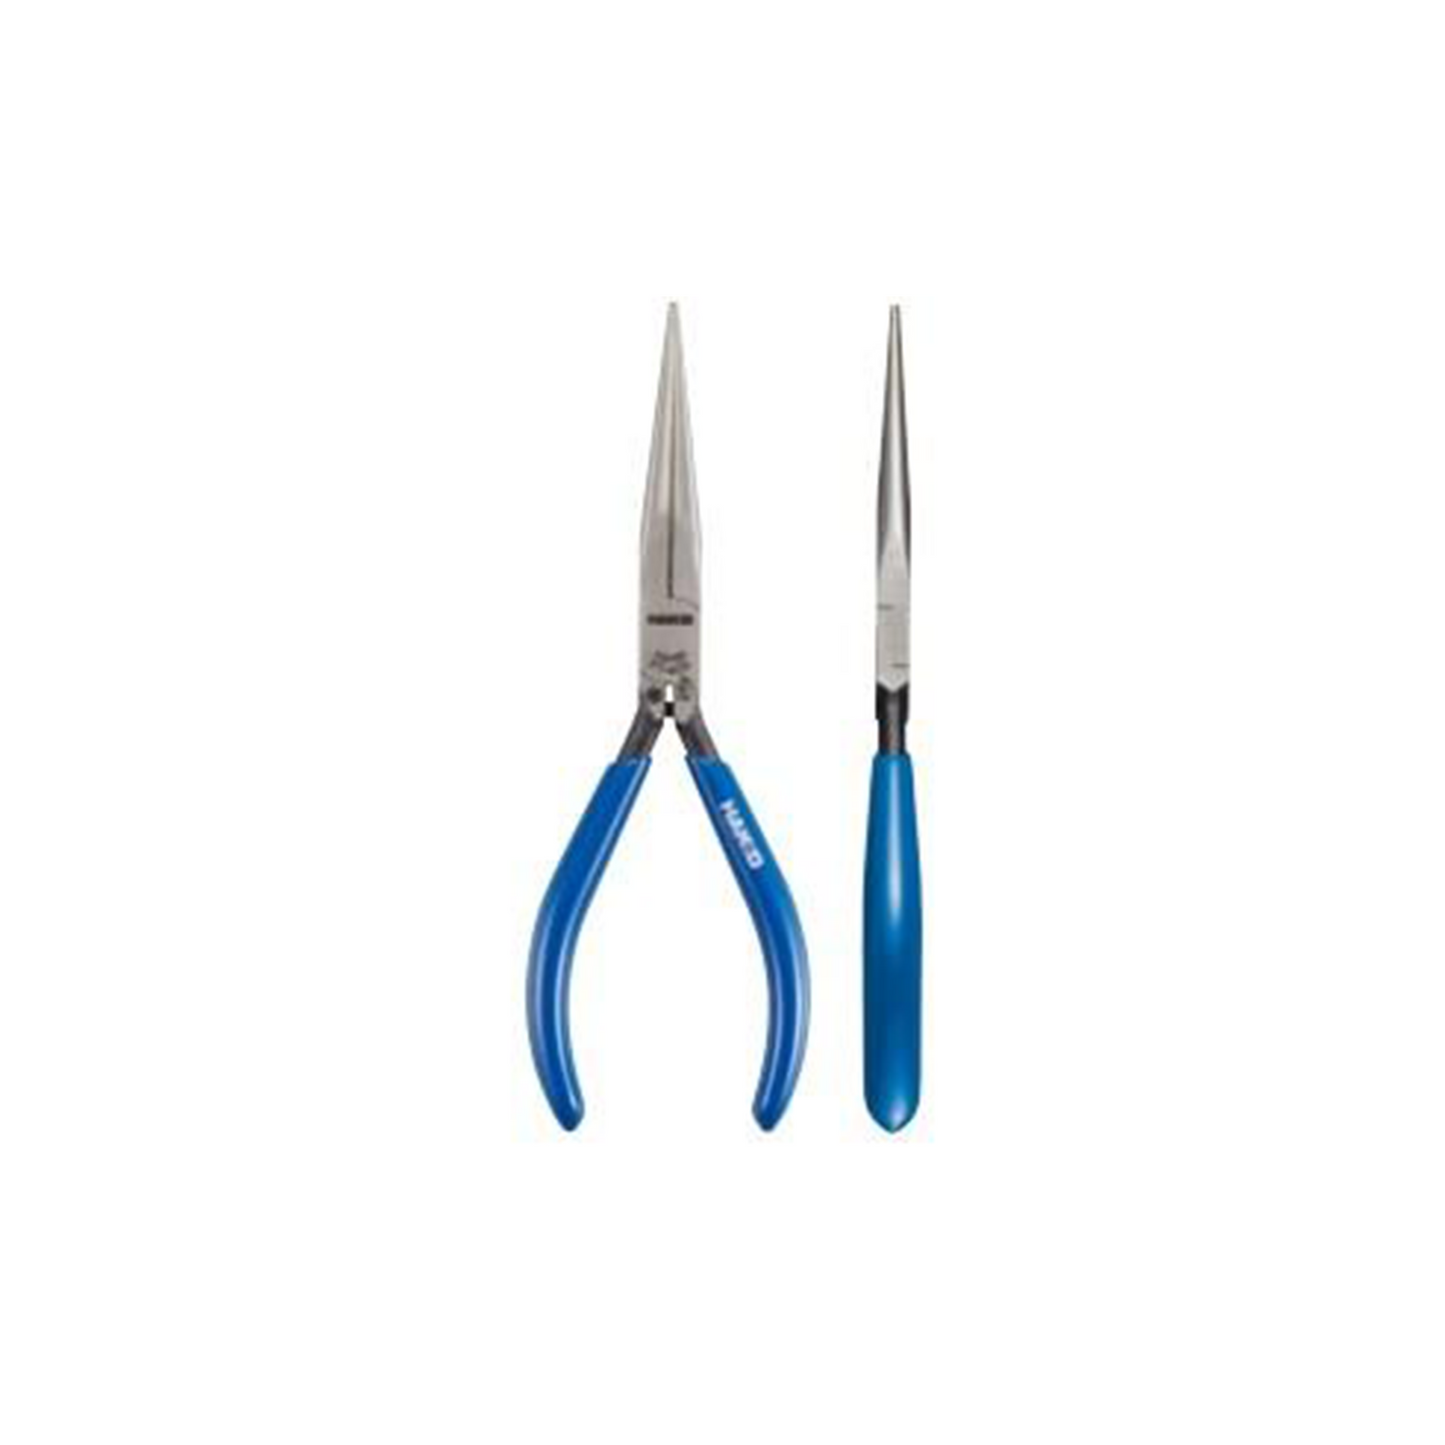 Hakko_ FT620-81 Nose Pliers_ Cutters, Pliers, Multi-Tools_ Hakko Products